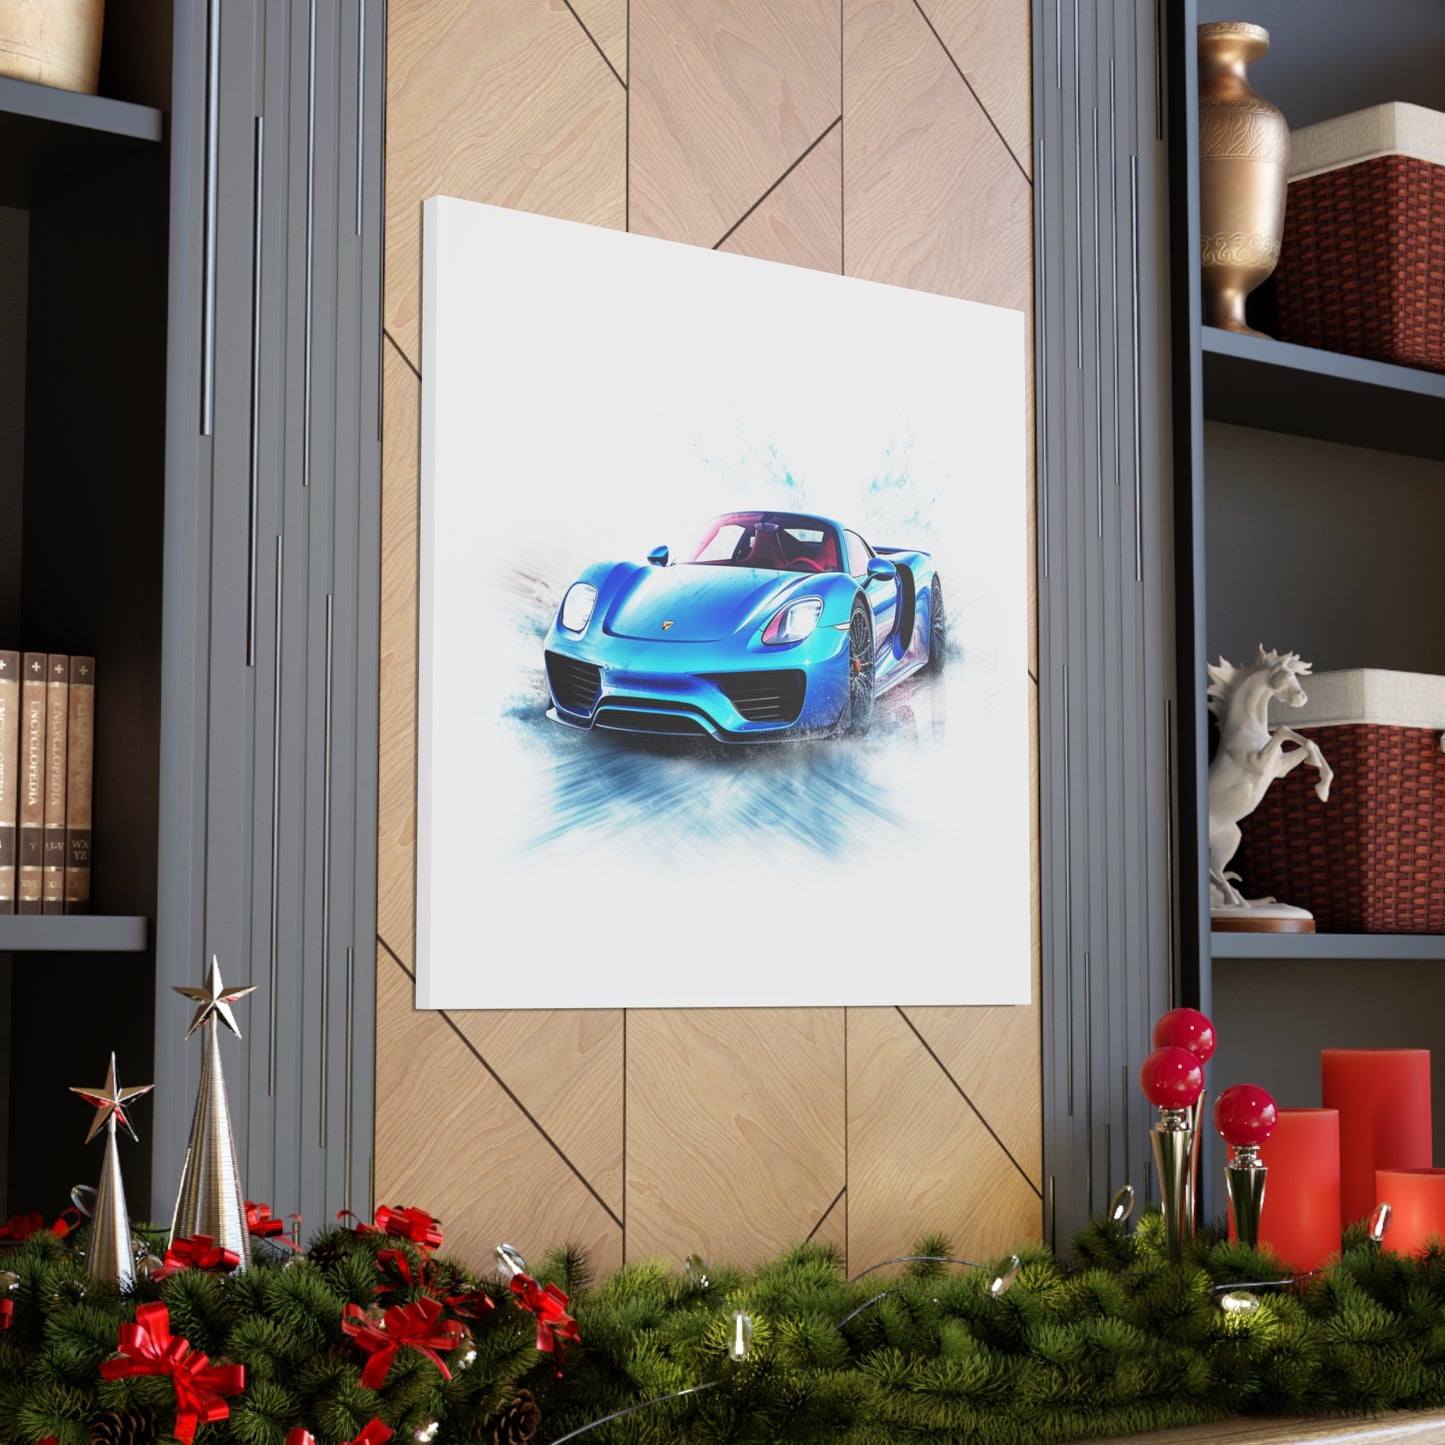 Canvas Gallery Wraps 918 Spyder with white background driving fast on water 1